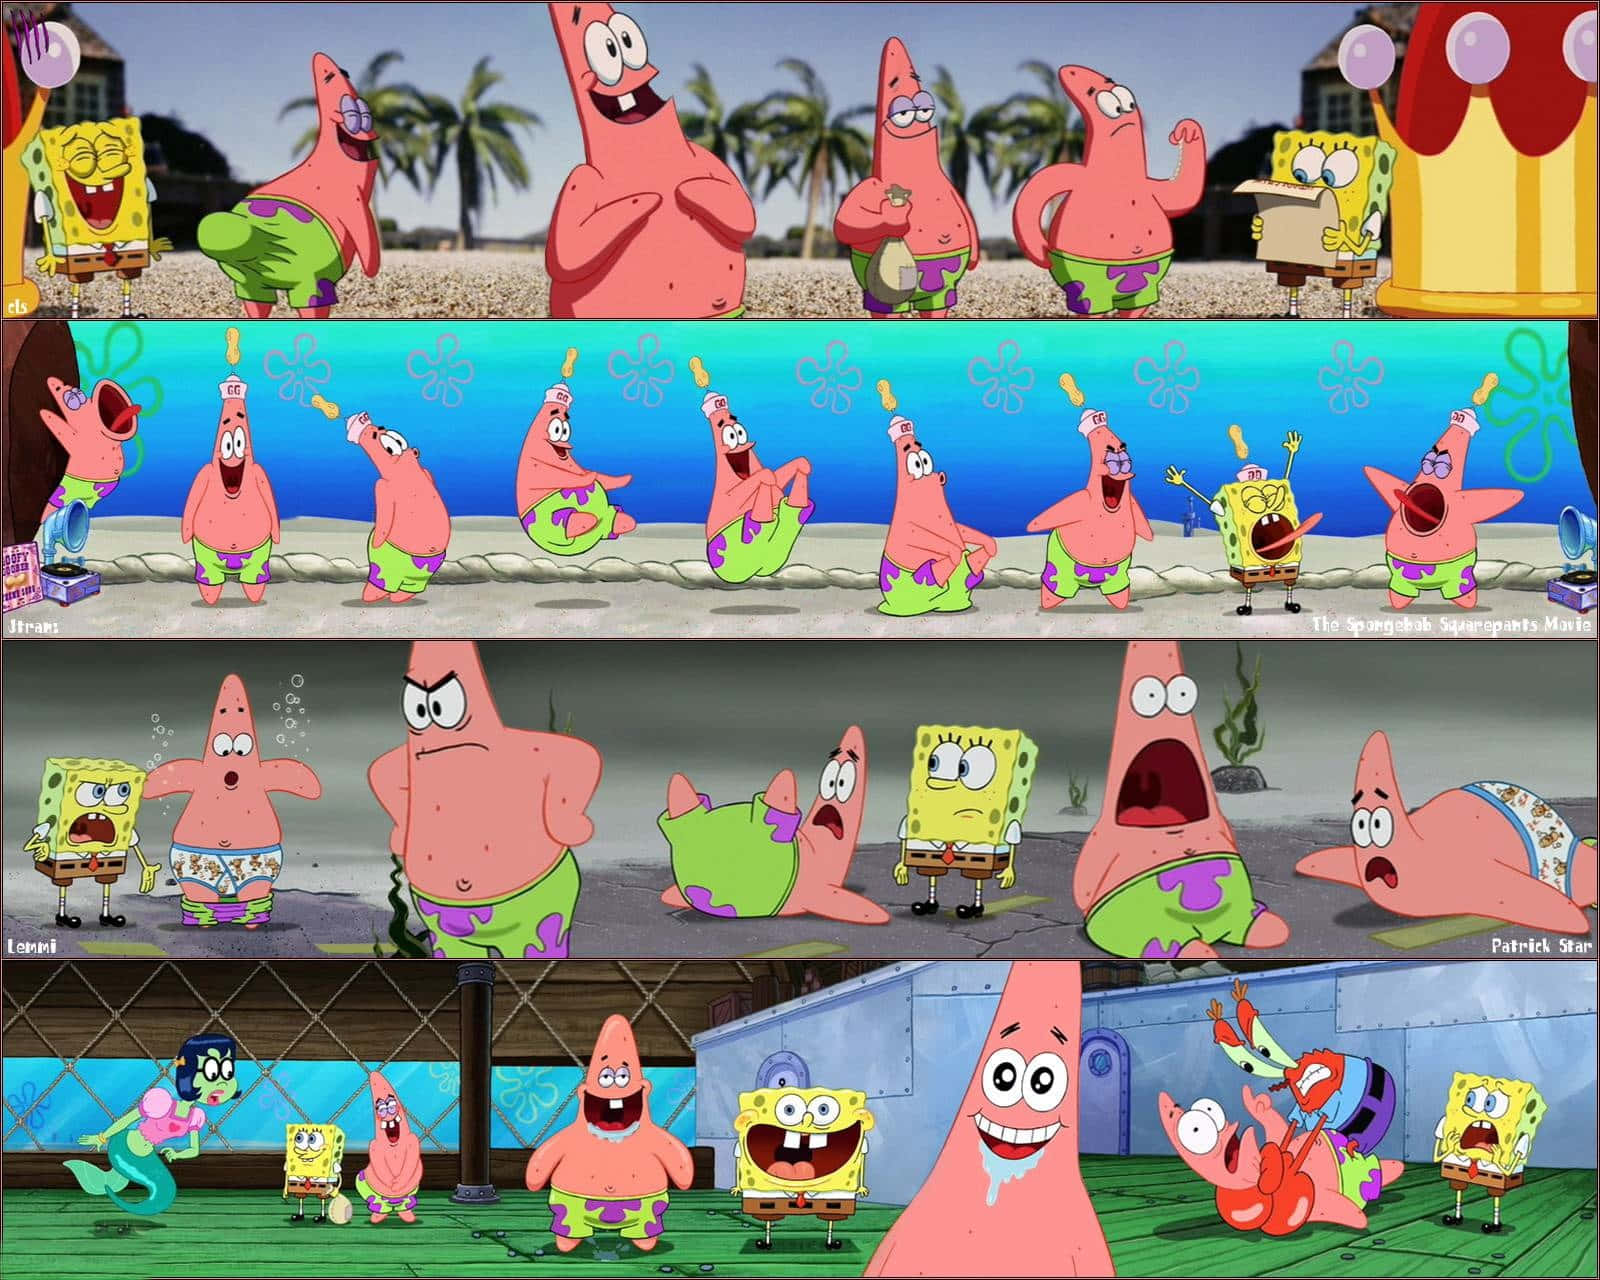 Unfazed by what life throws at him, Patrick Star remains his optimistic self.